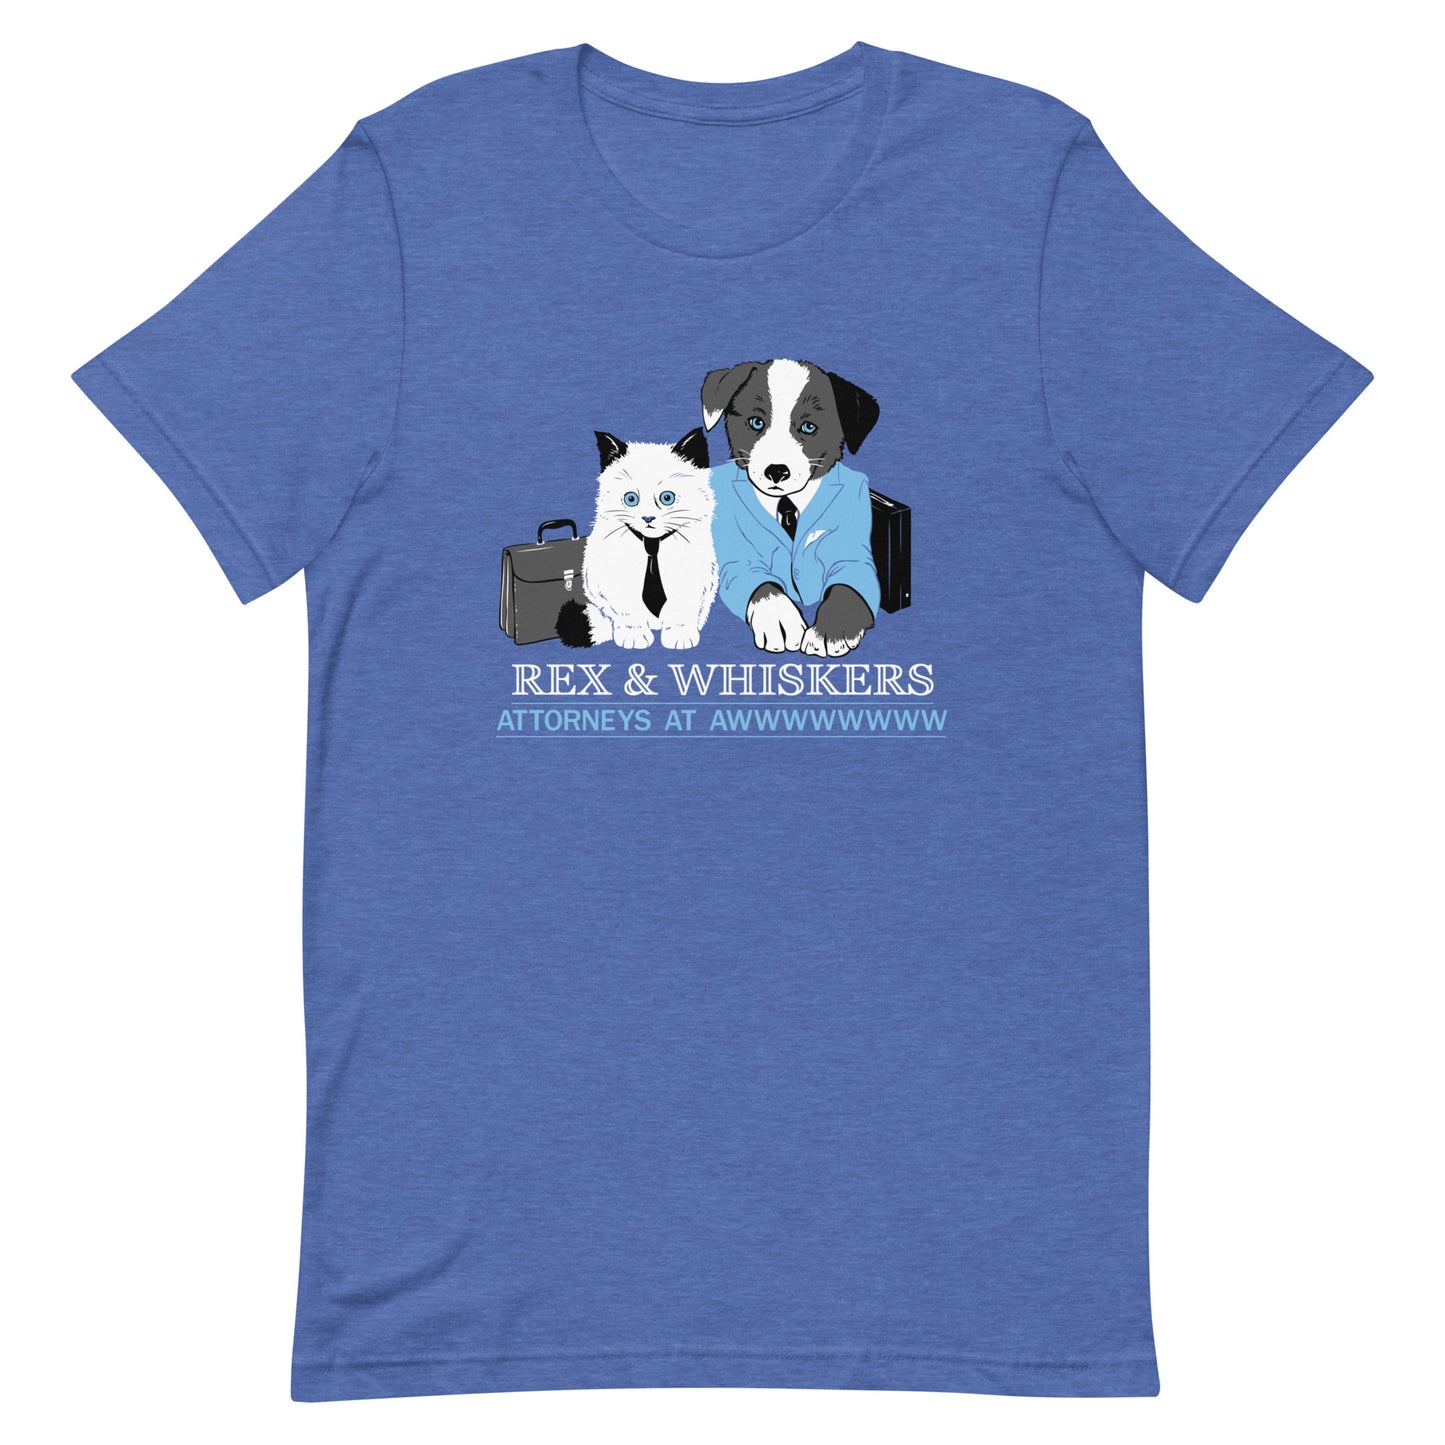 Rex and Whiskers Attorneys Men's Signature Tee